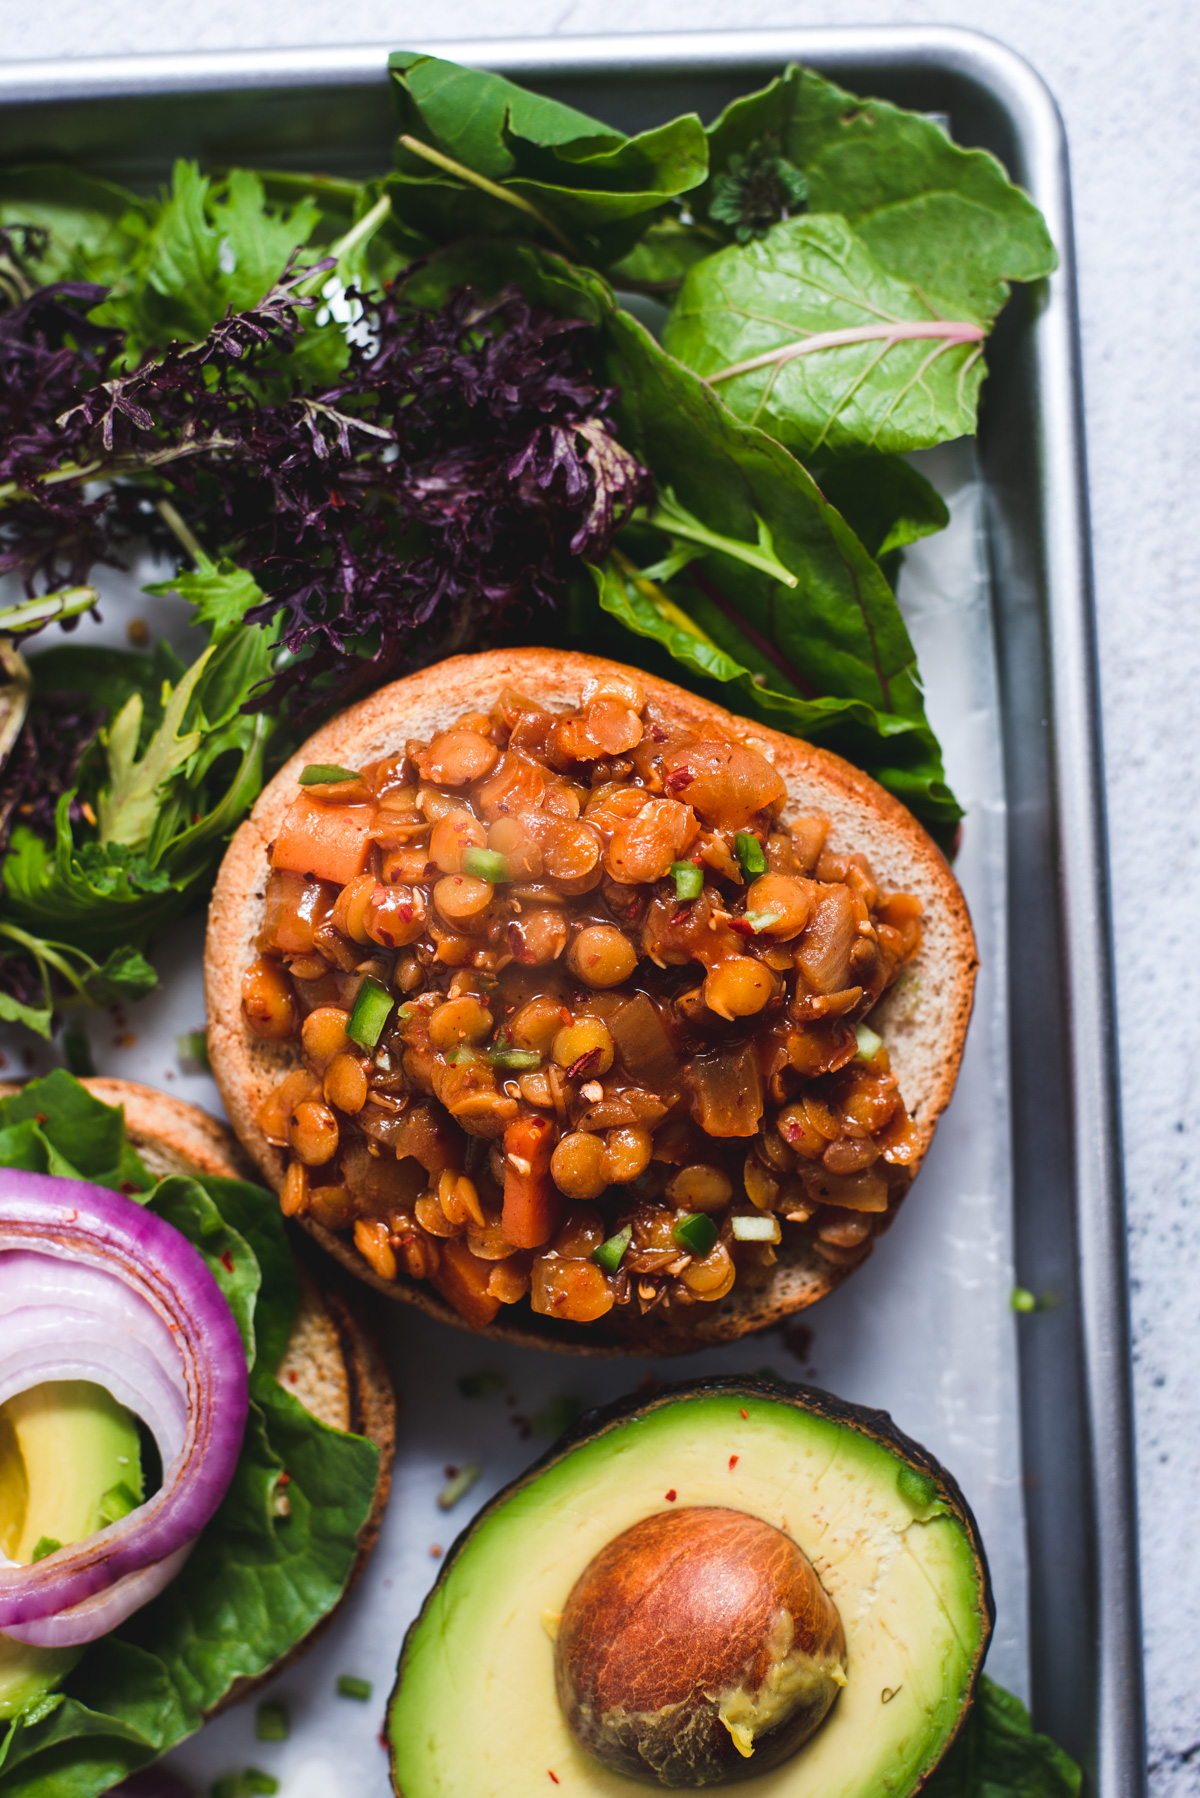 Lentils piled on whole wheat bun surrounded by lettuce.